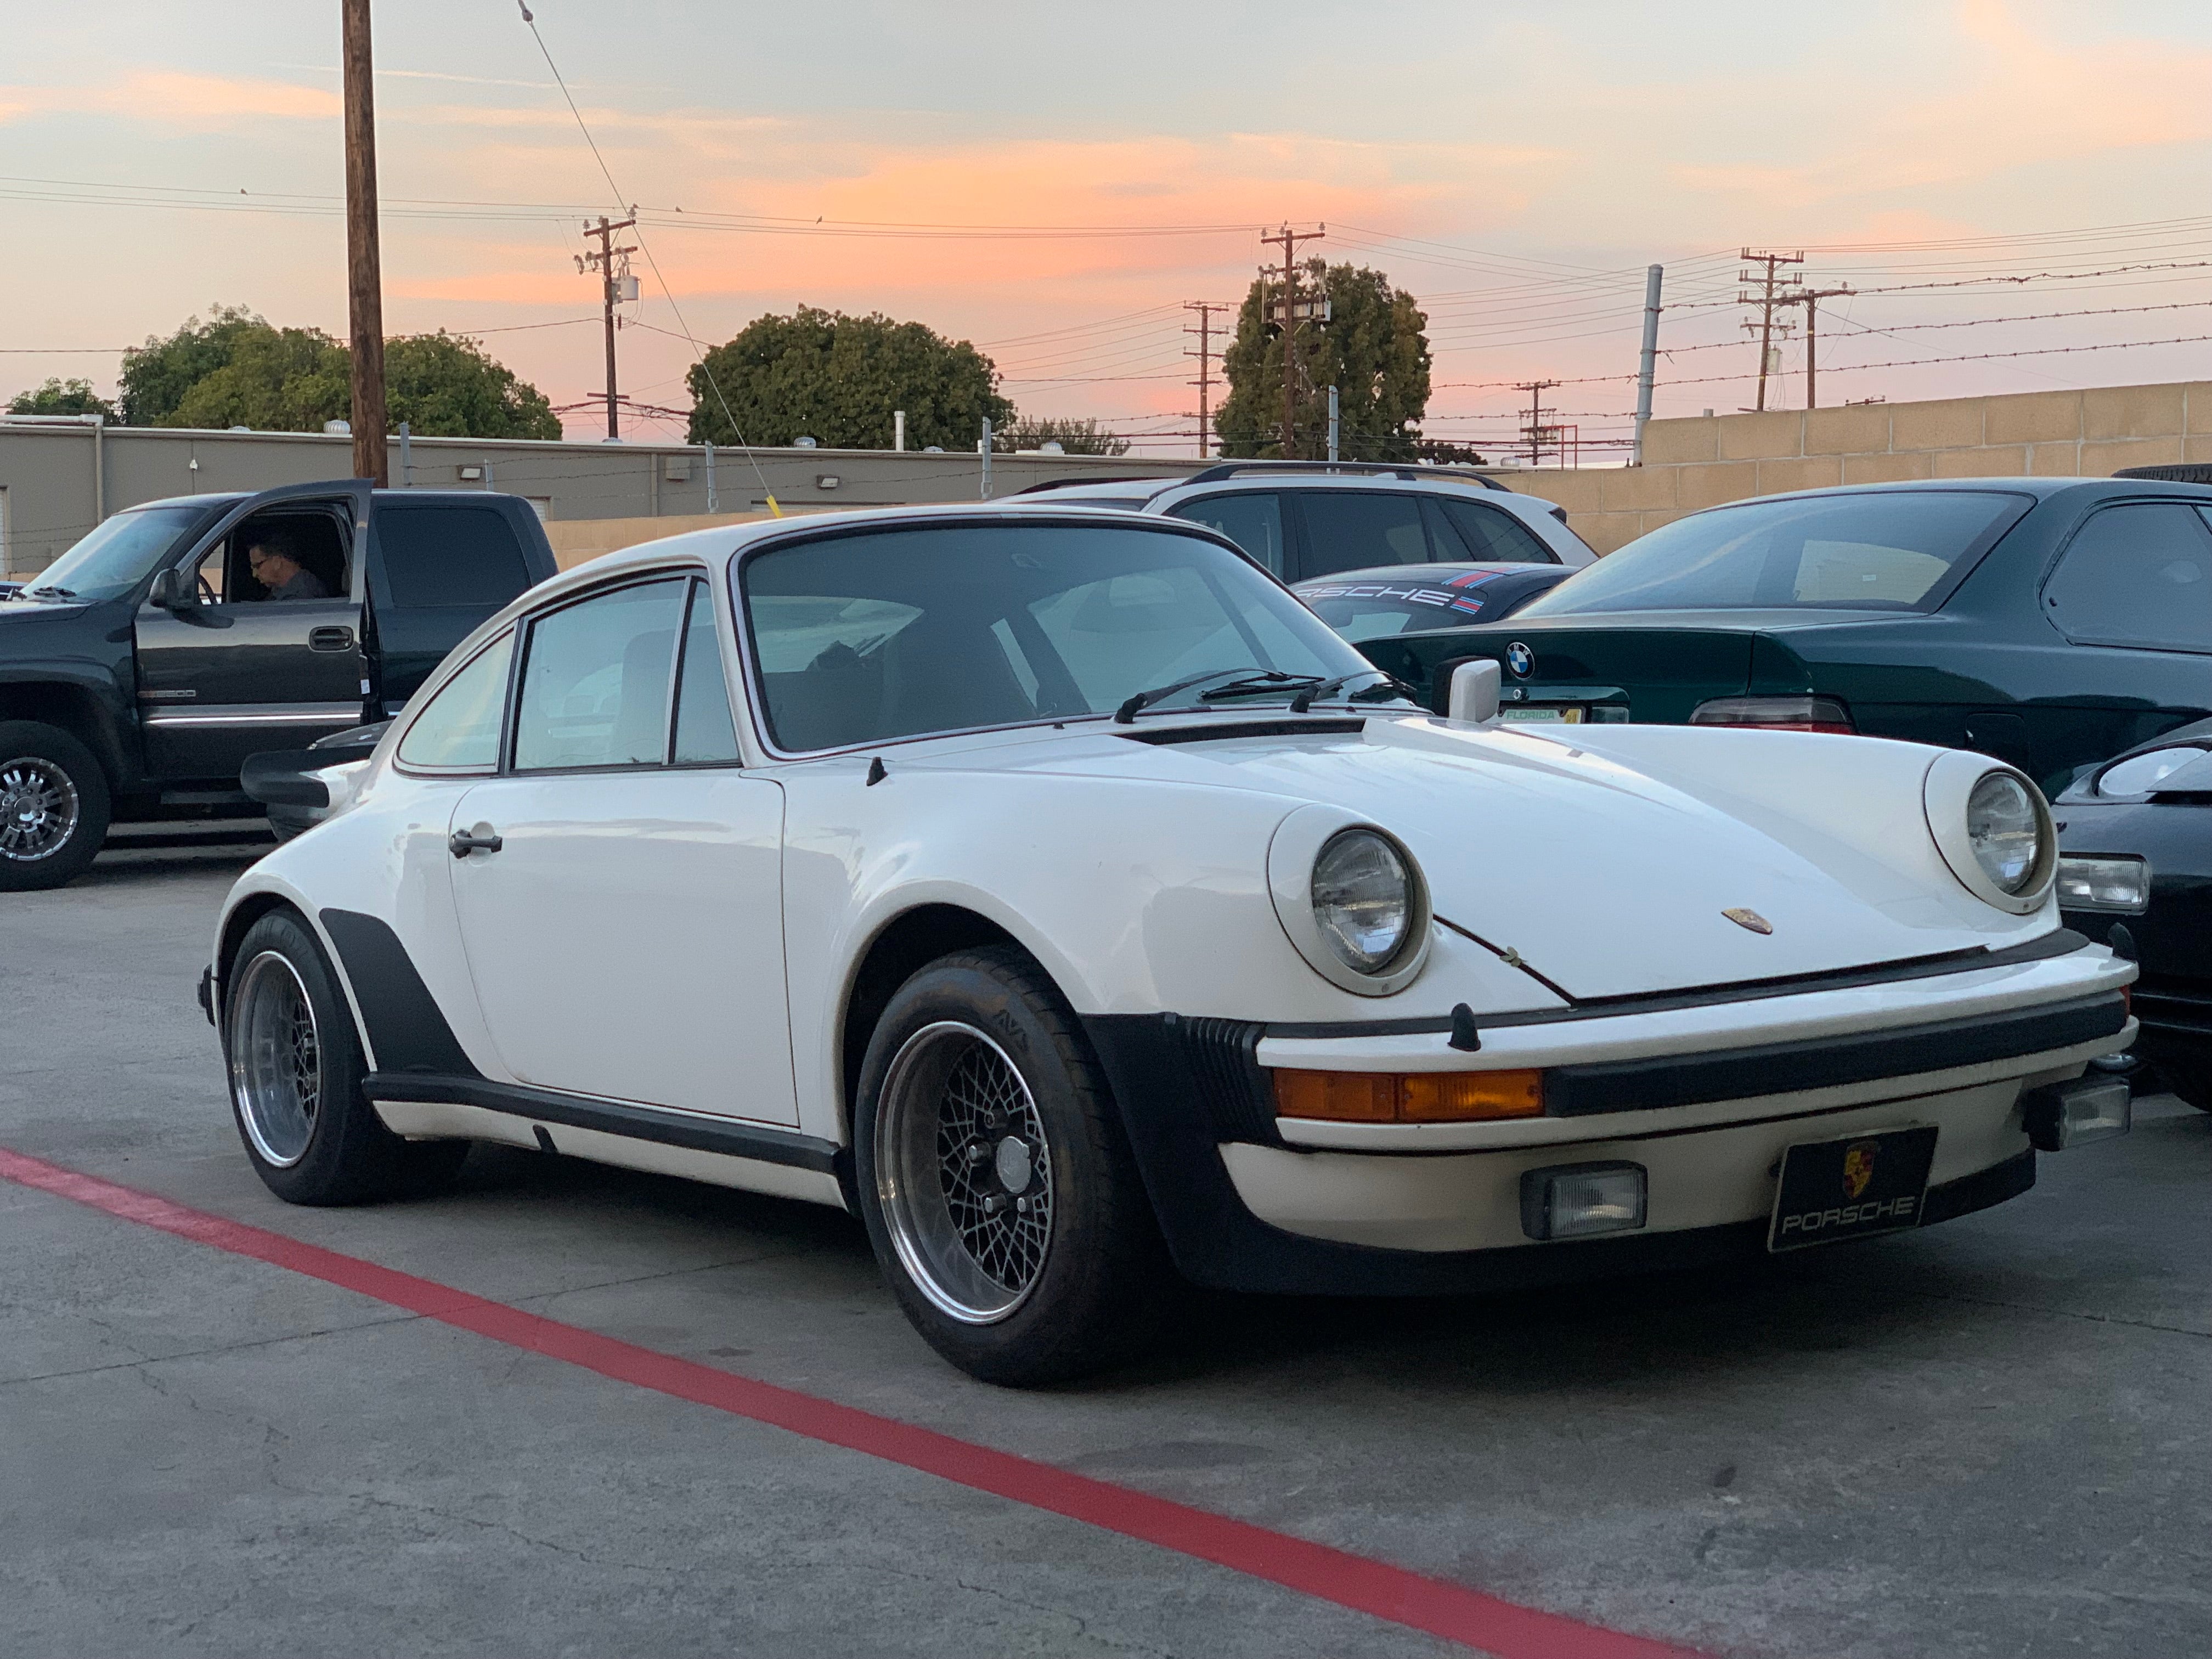 A 1976 Porsche 911 Turbo Carrera Front Quarter View sitting in the parking space of the shop.